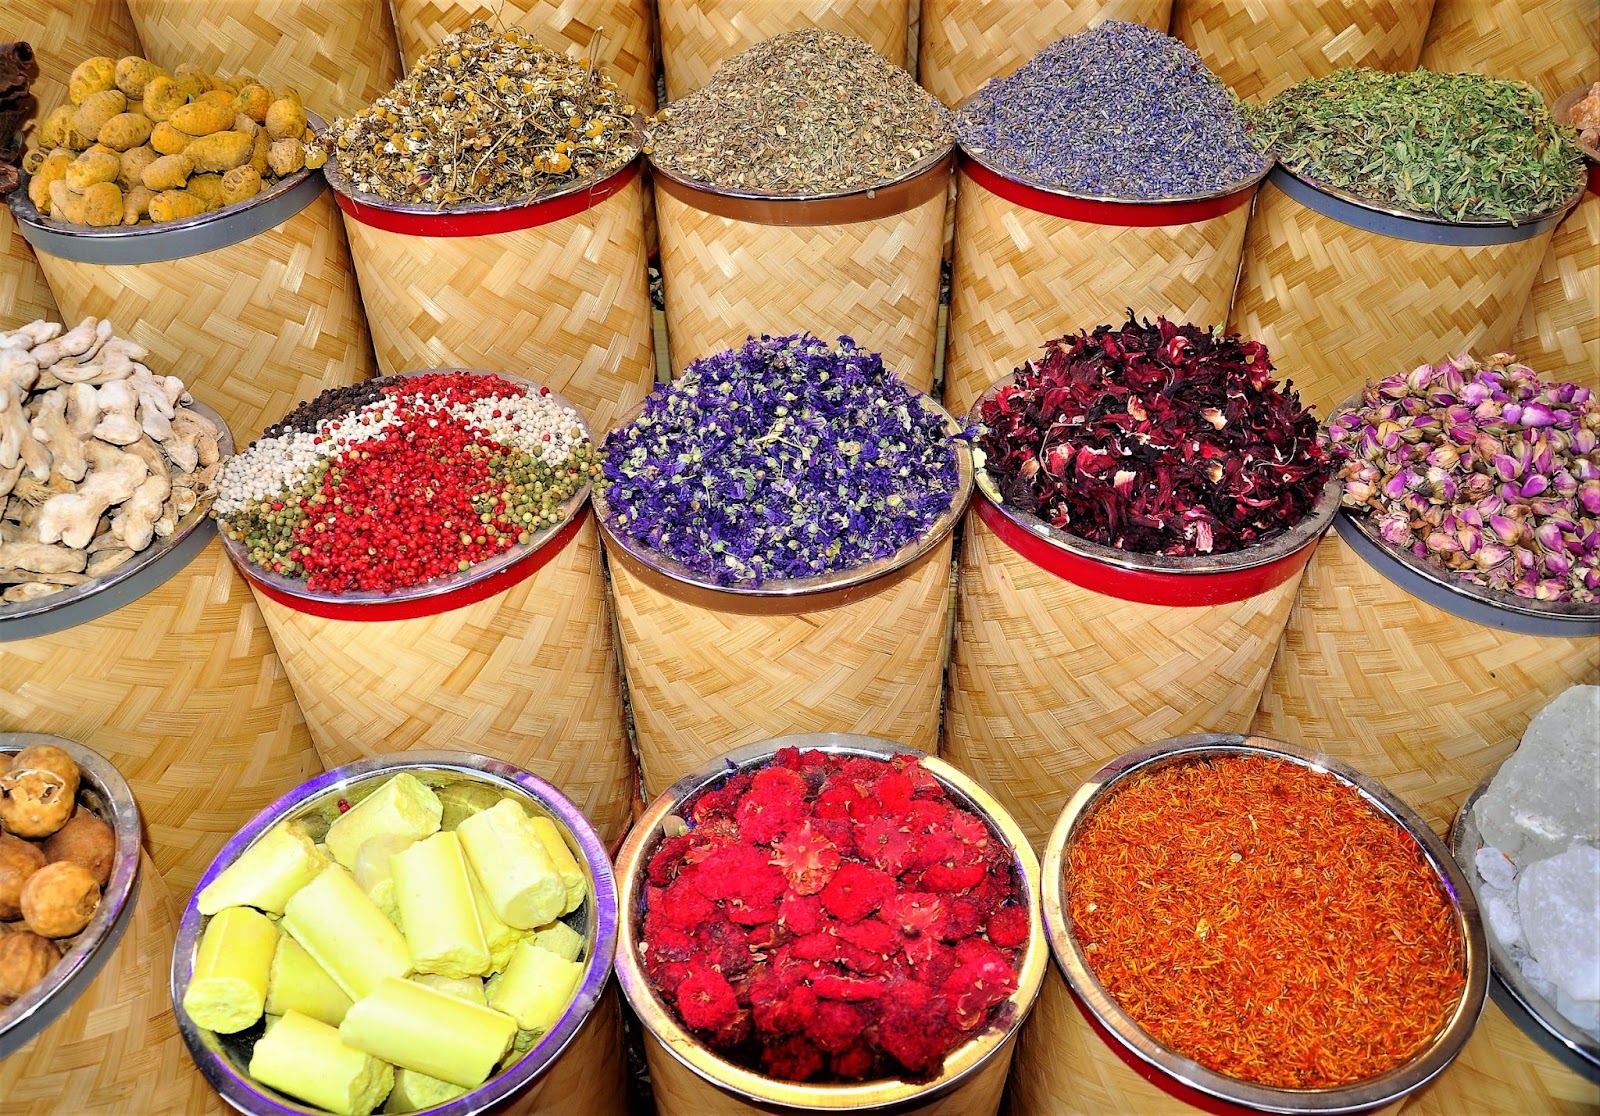 2 days in Dubai, Spice Souk, Deira, colorful spices in display